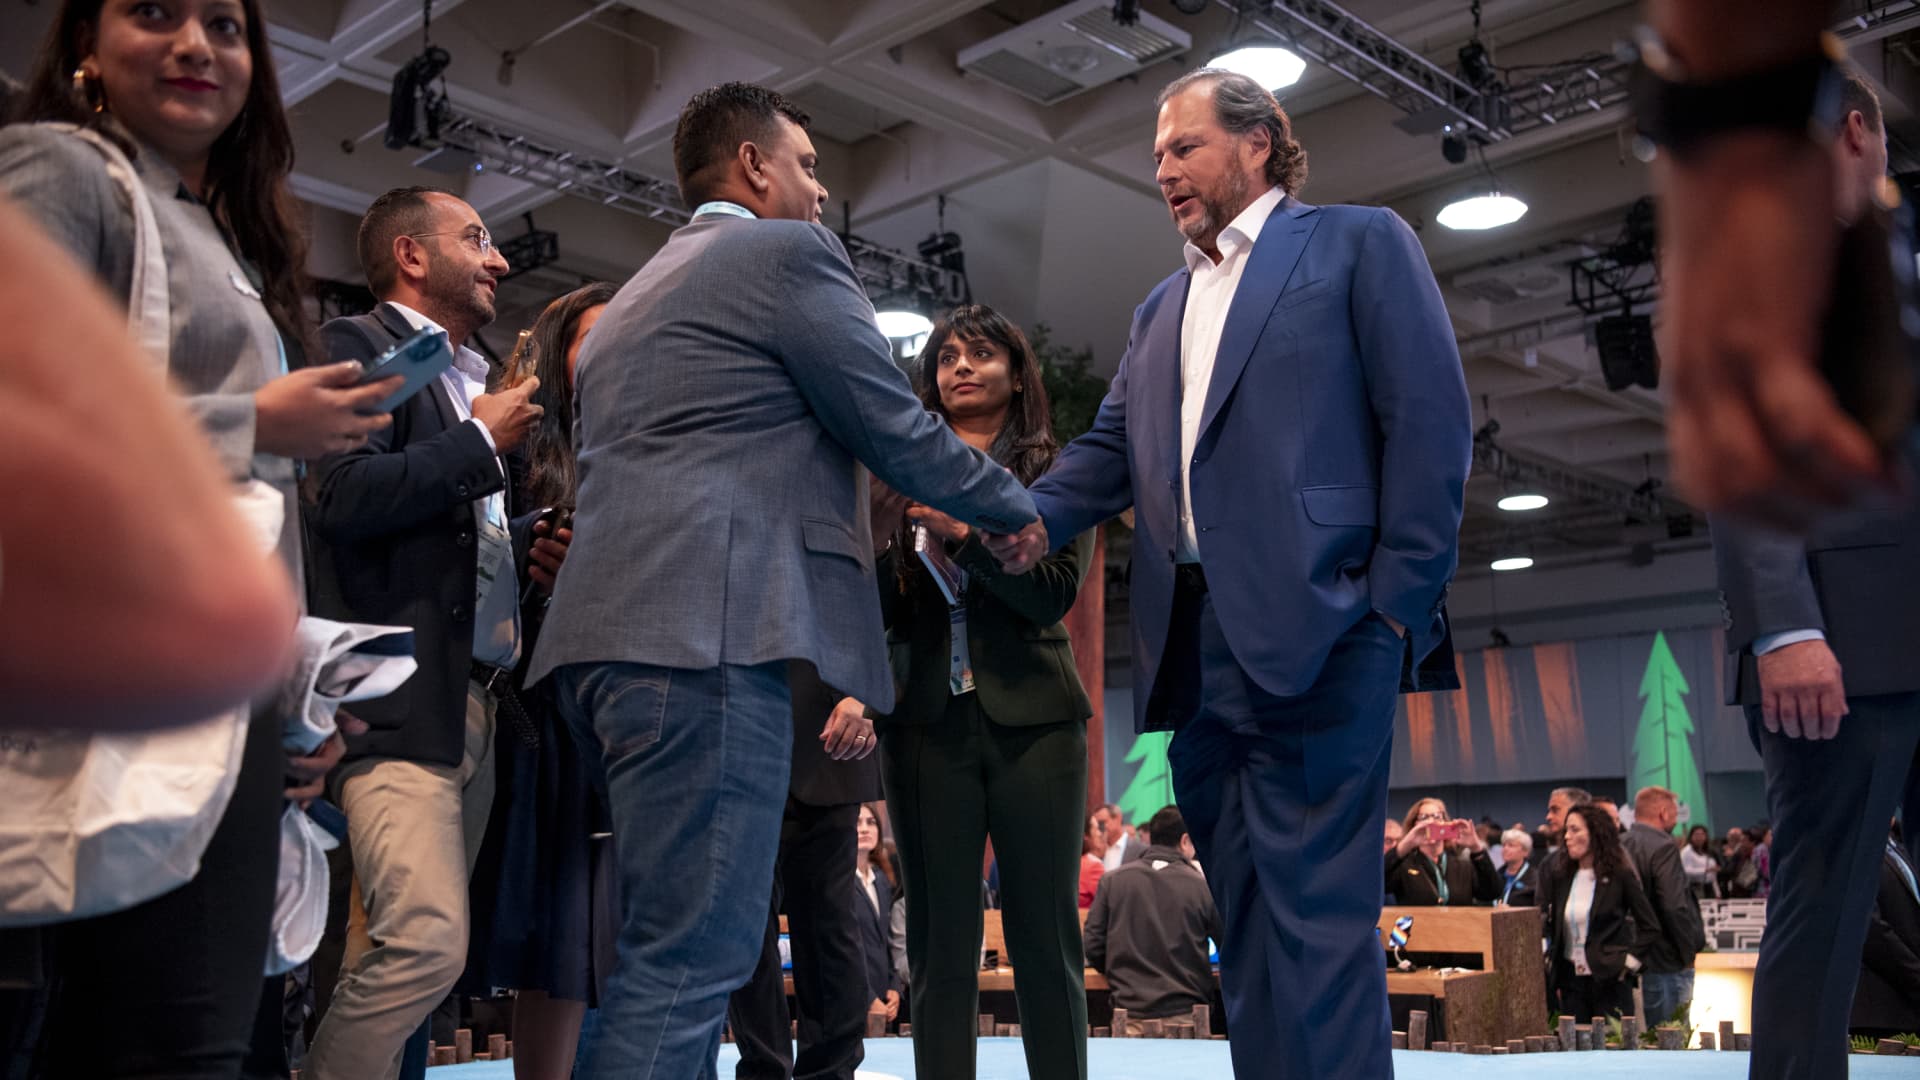 Salesforce is luring 'boomerangs' to reaccelerate growth